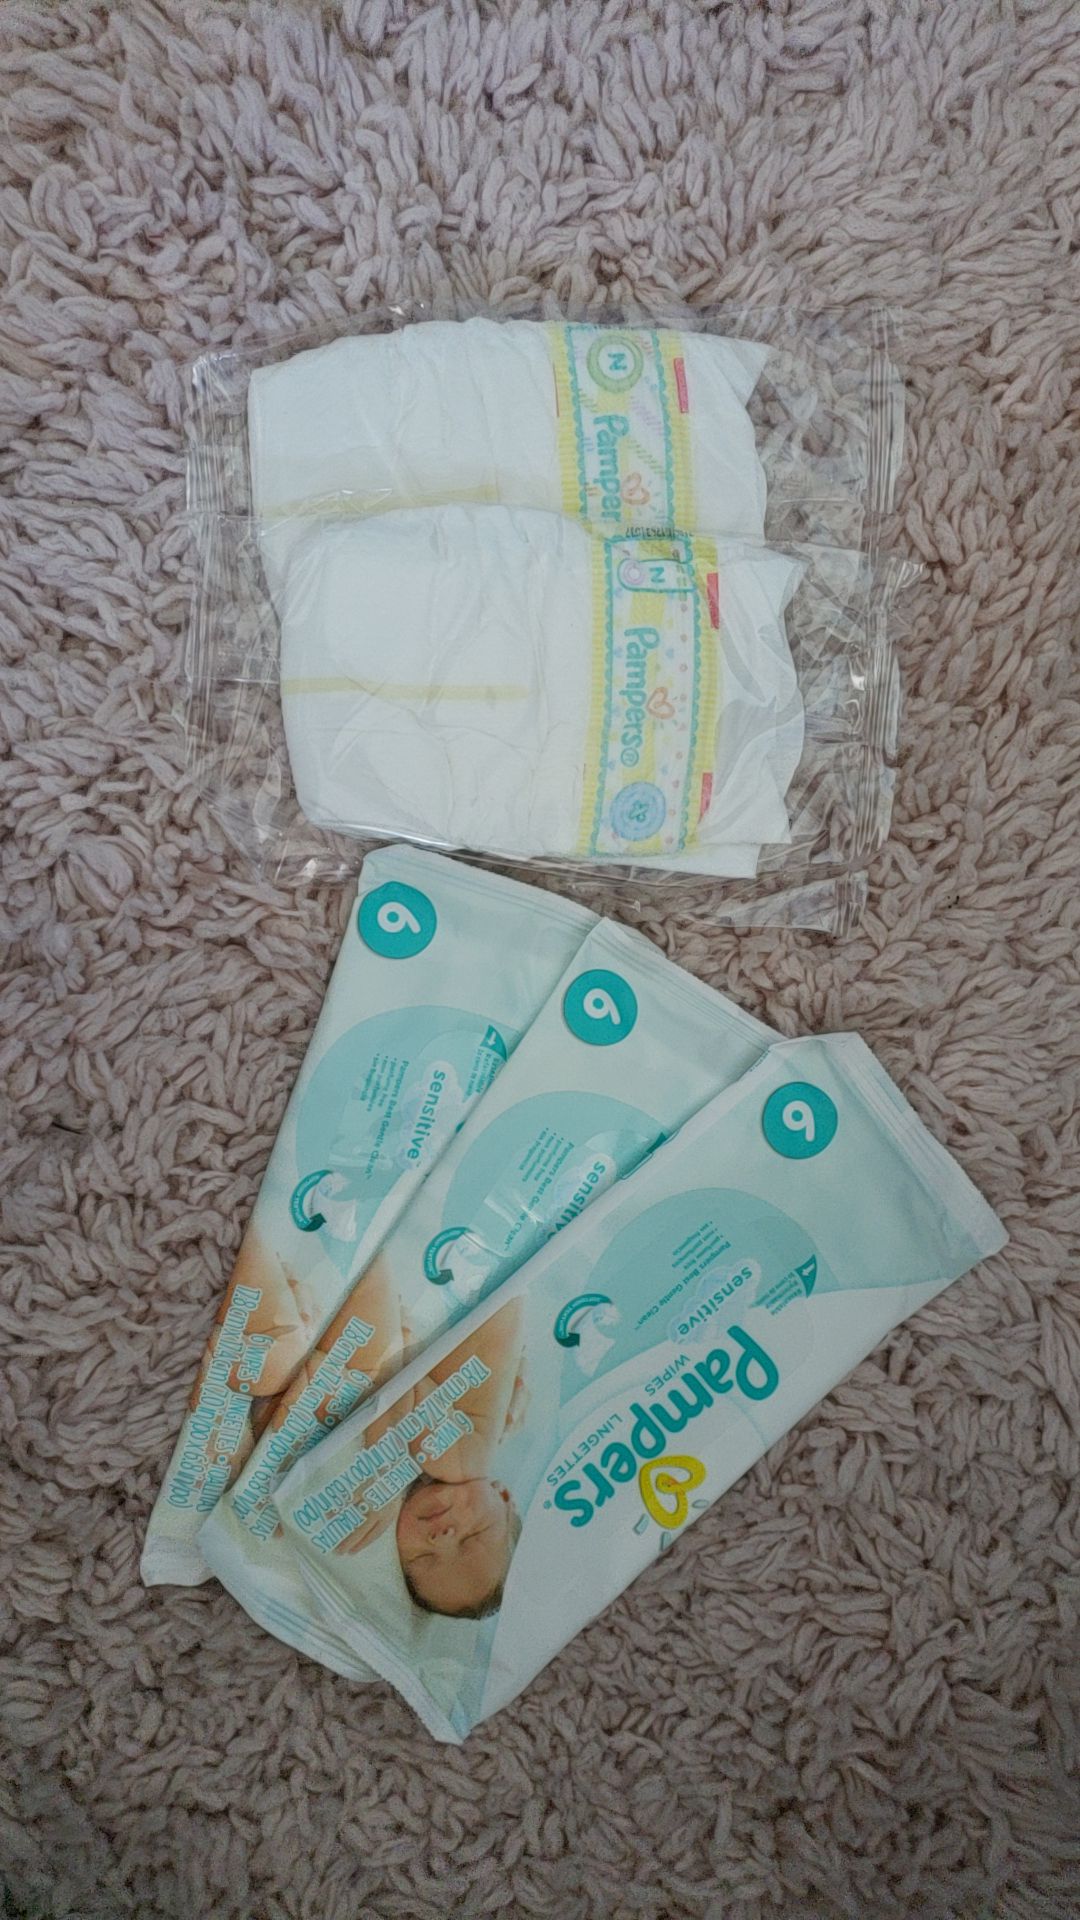 Pampers wipes set